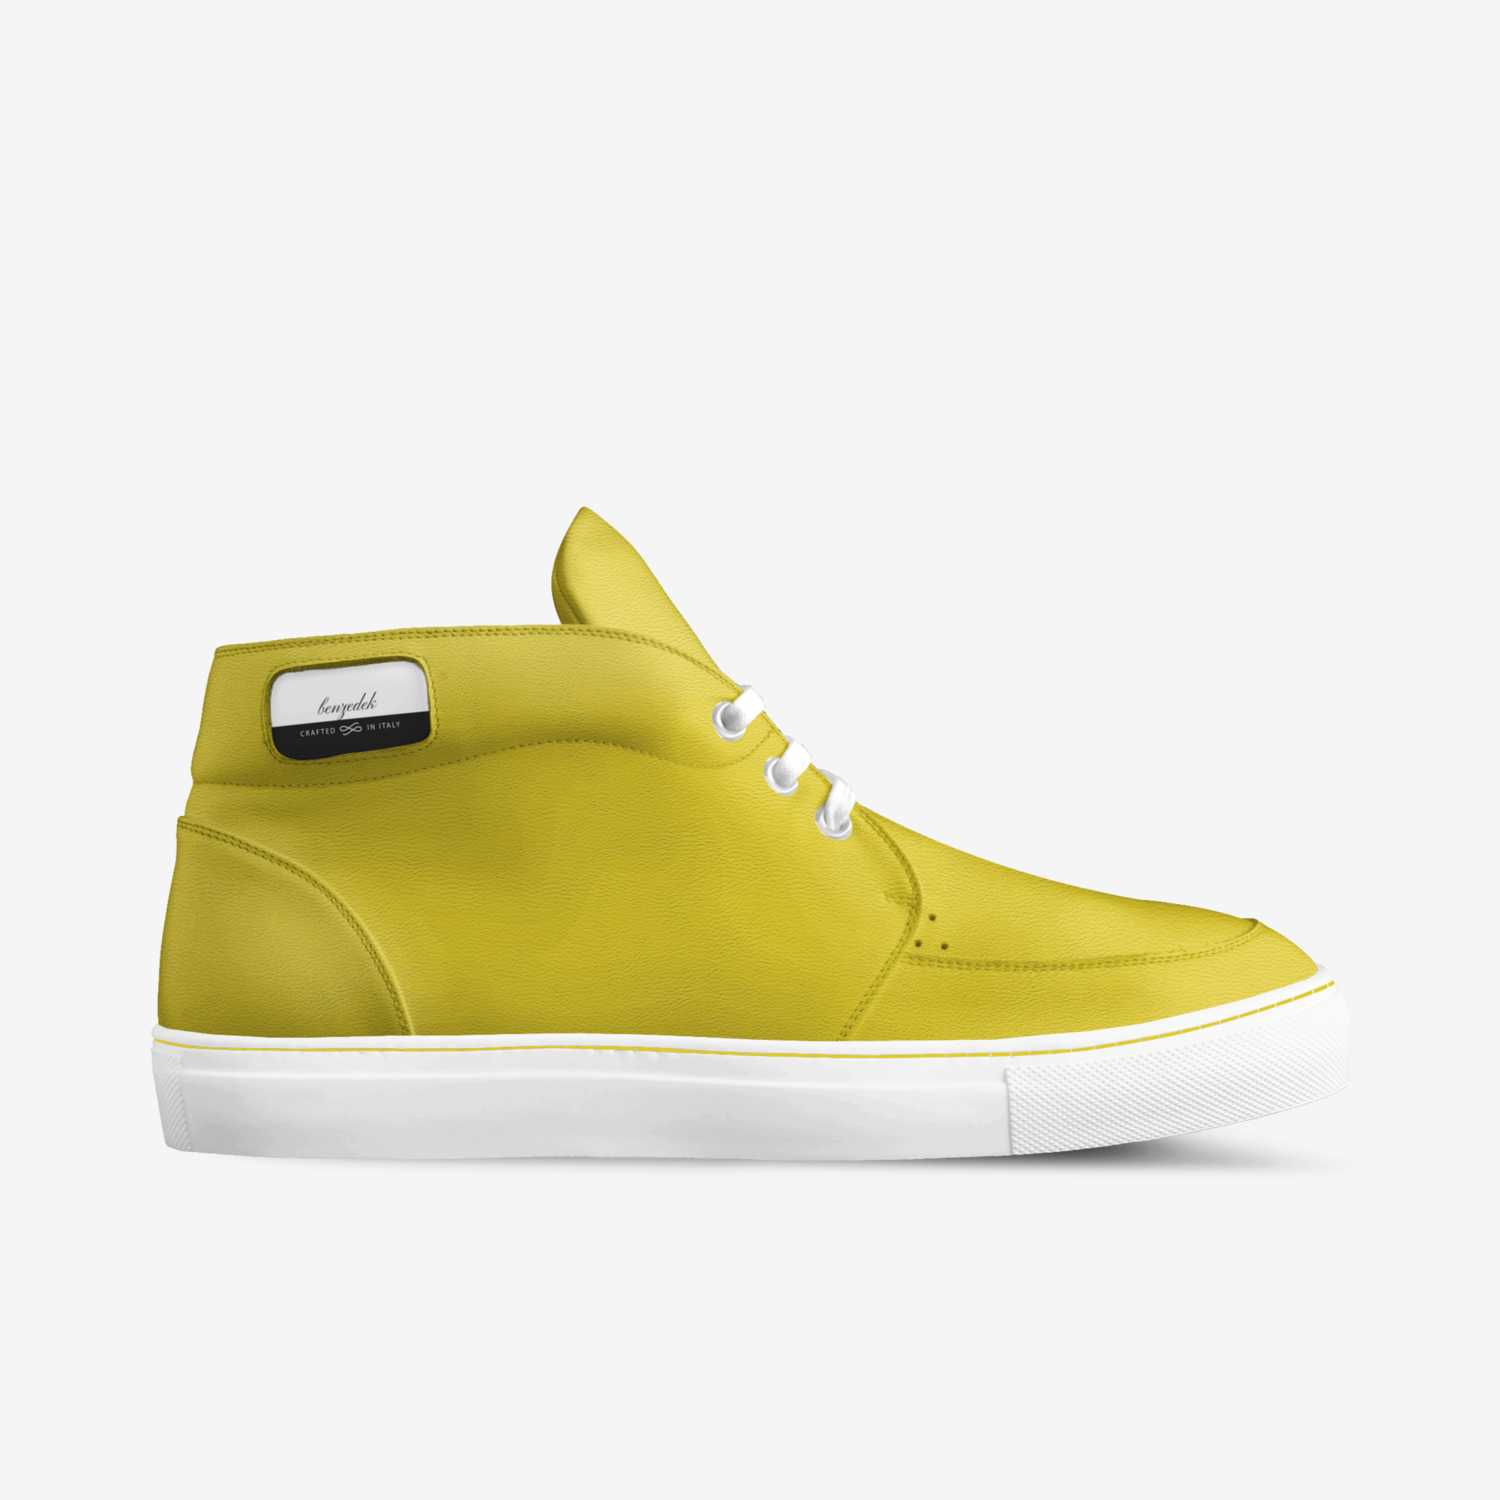 BENZEDEK YELLOW custom made in Italy shoes by Benson Singh Bhamra | Side view